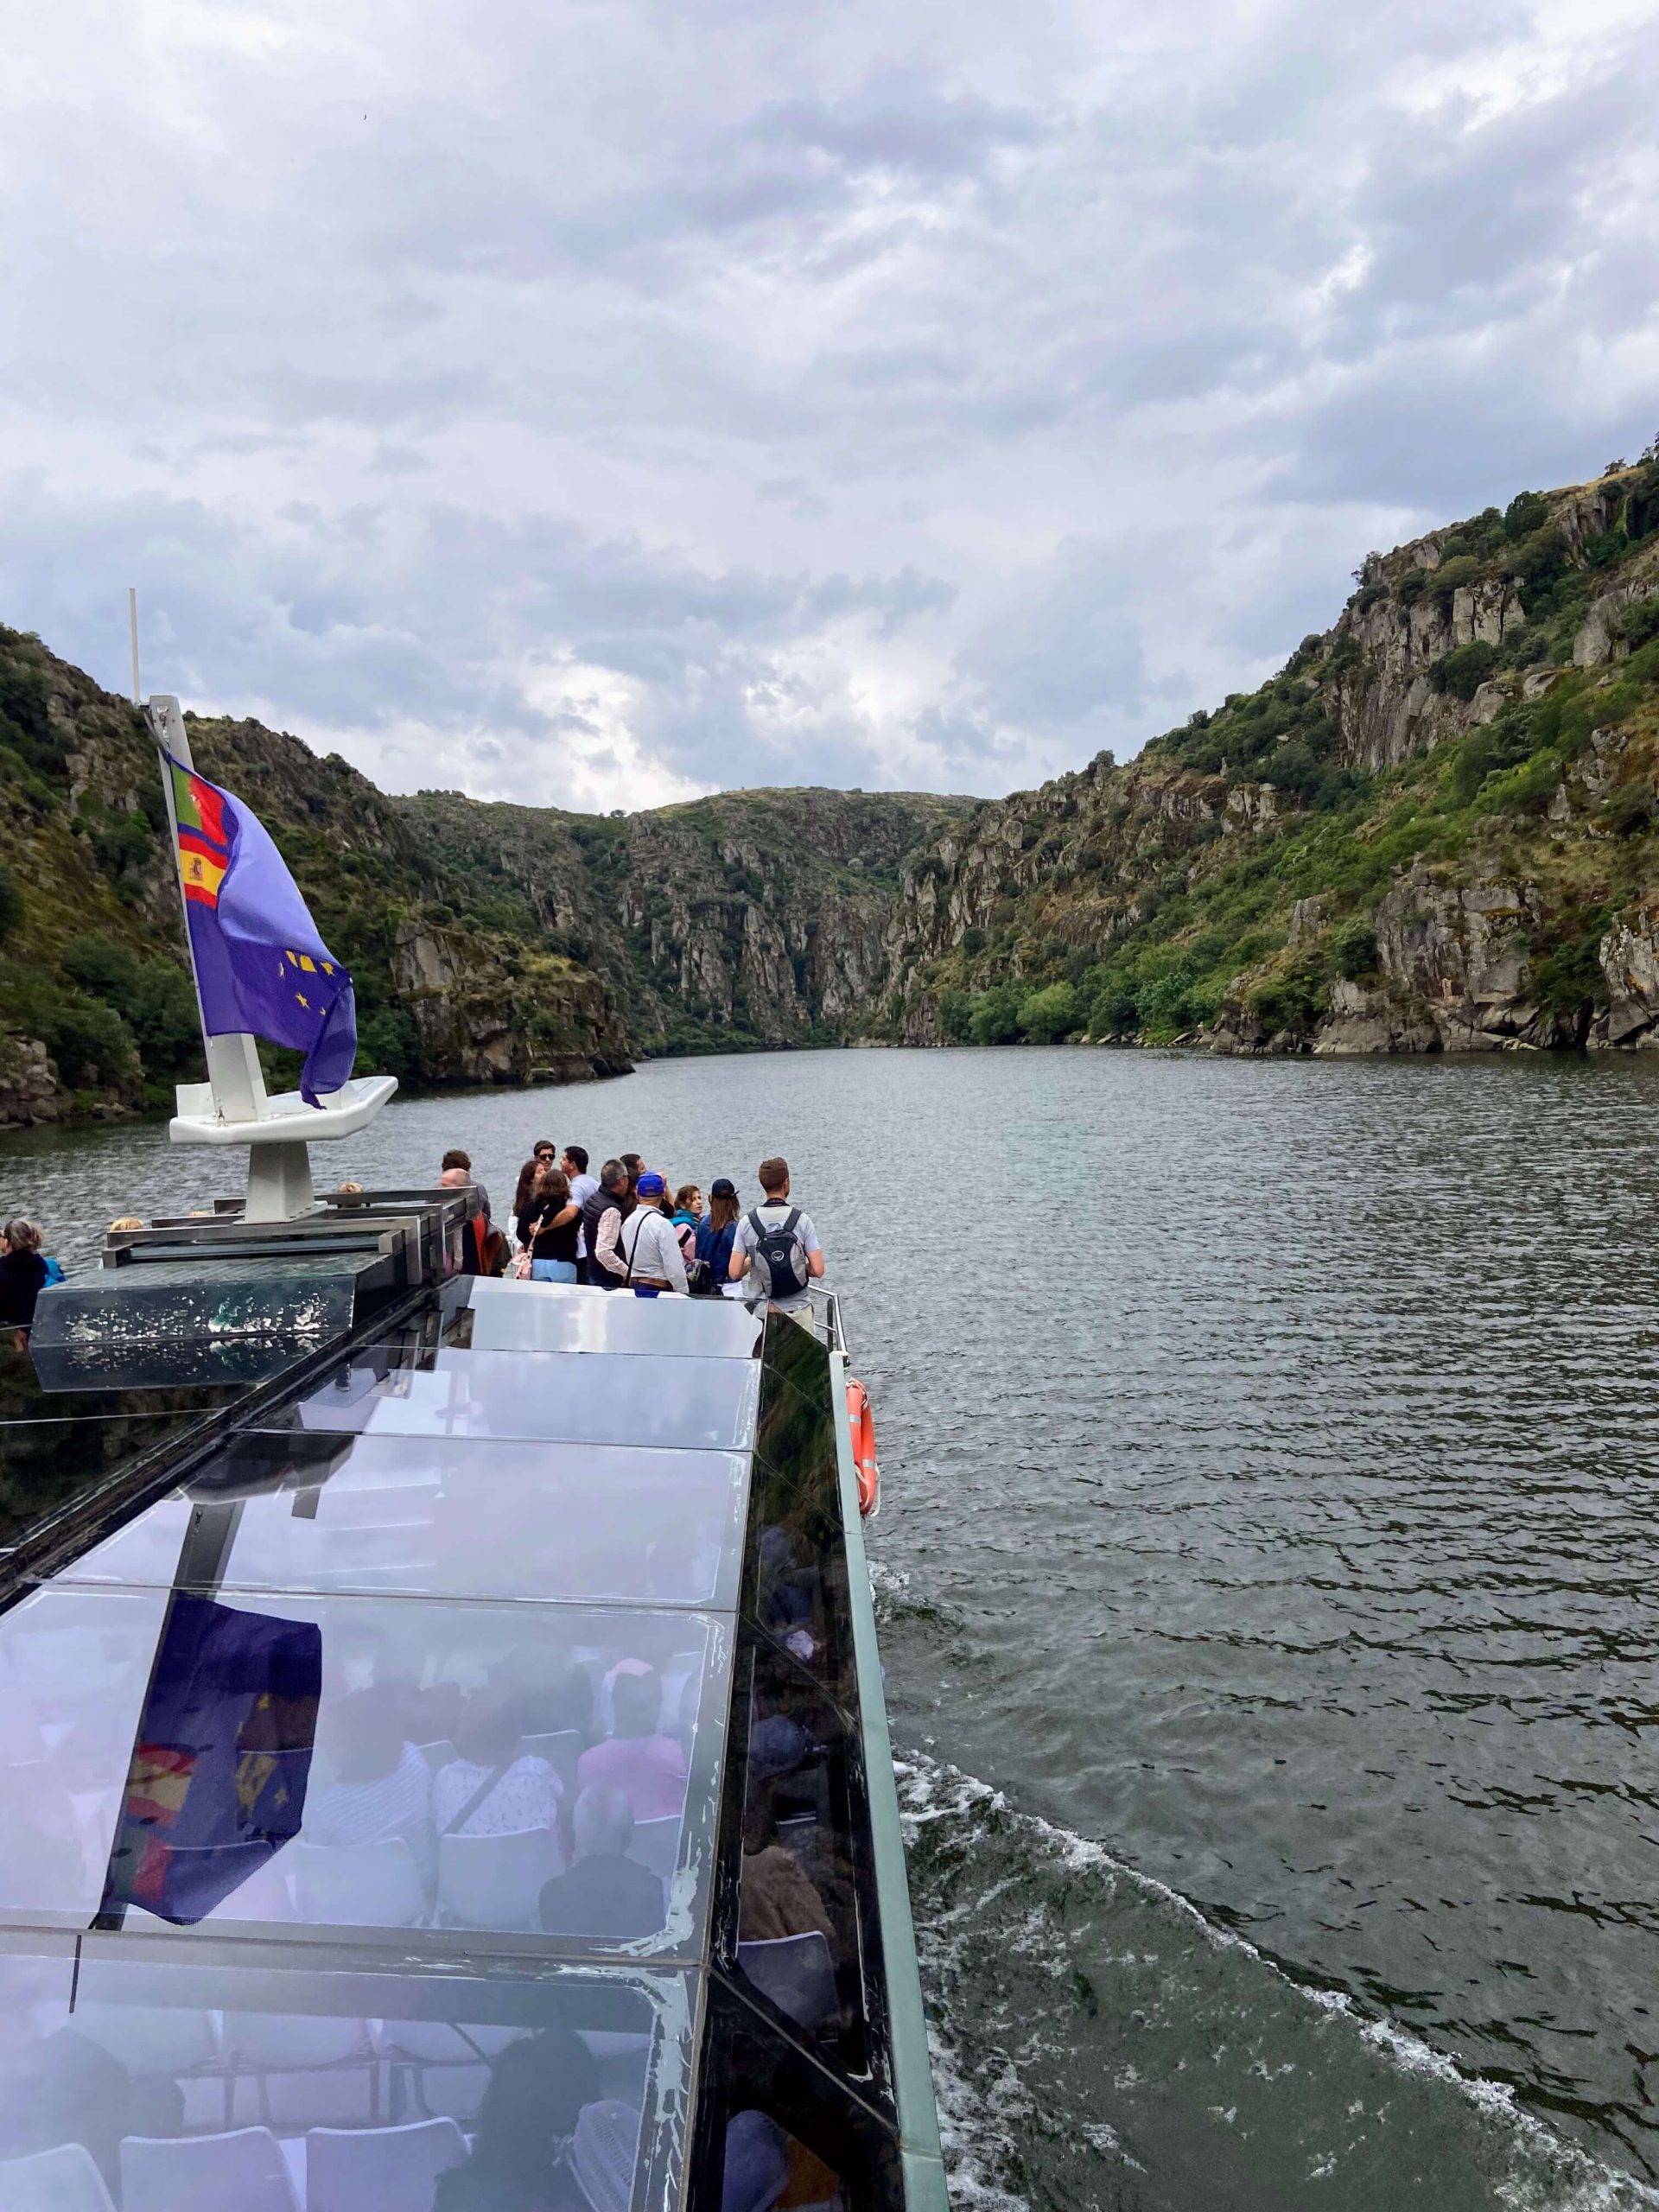 Image of a boat trip between the cliffs of Douro Internacional